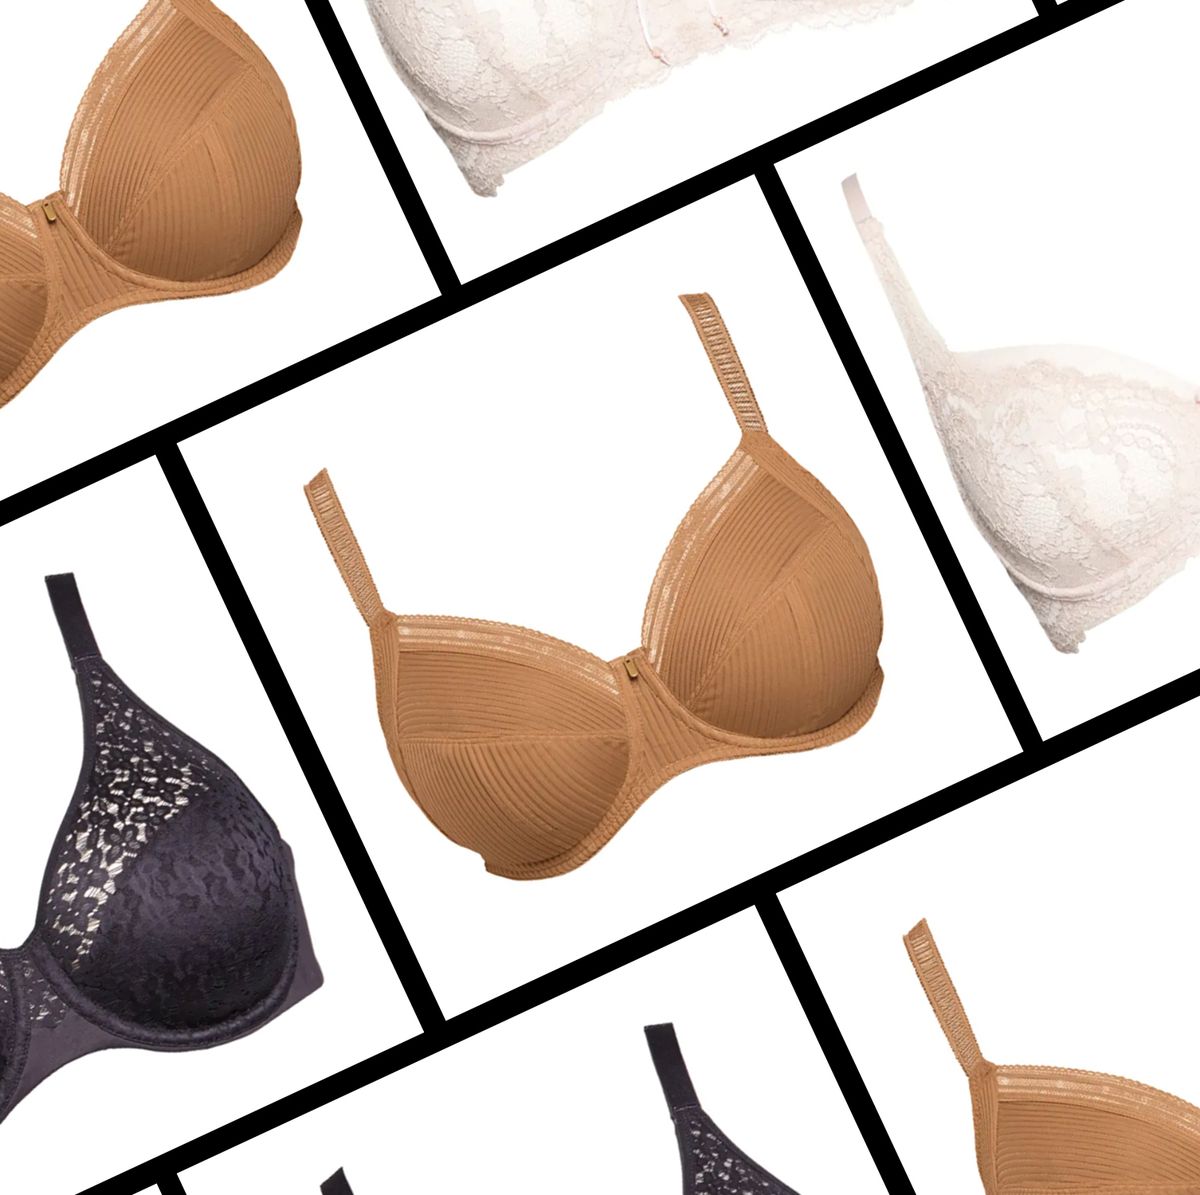 12 Comfortable Bras to Buy From Nordstrom's Half-Yearly Sale